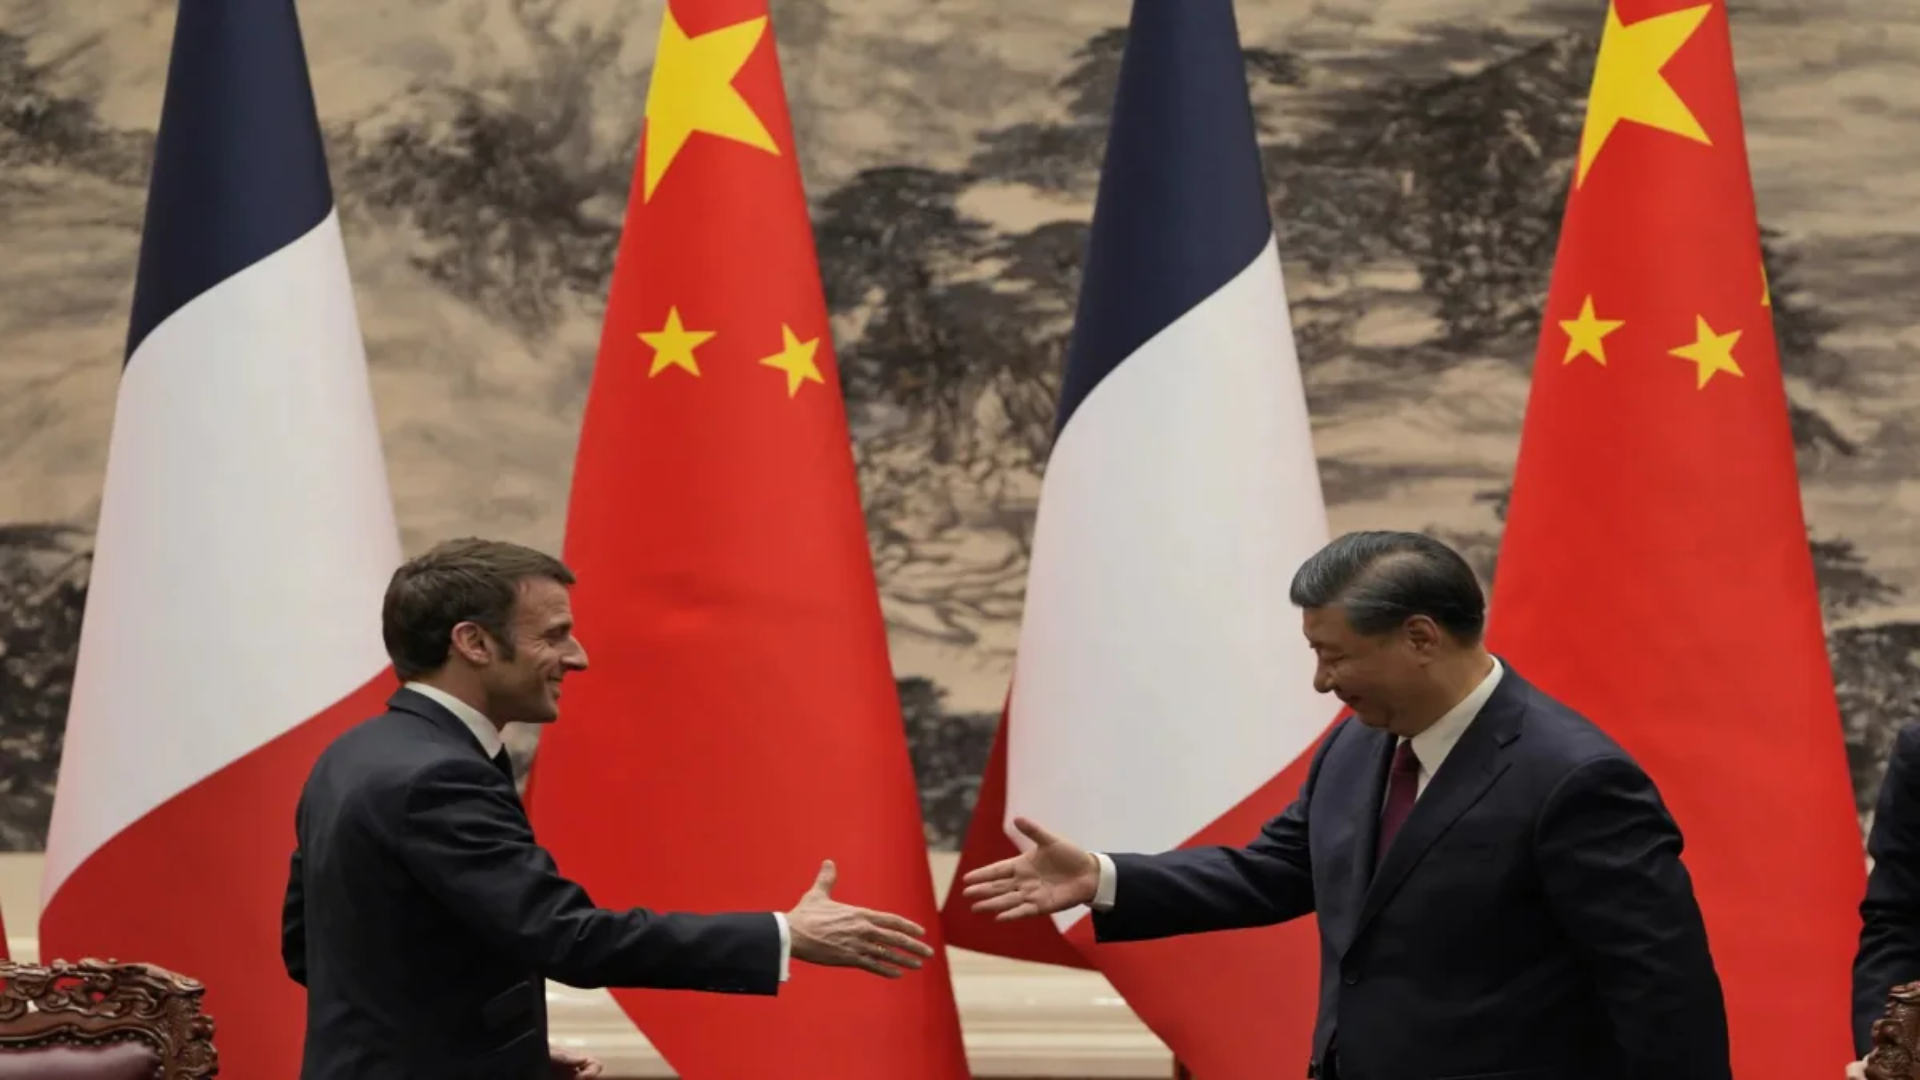 Will French President’s Call for Economic Reset with China Impact Xi’s Visit To France?